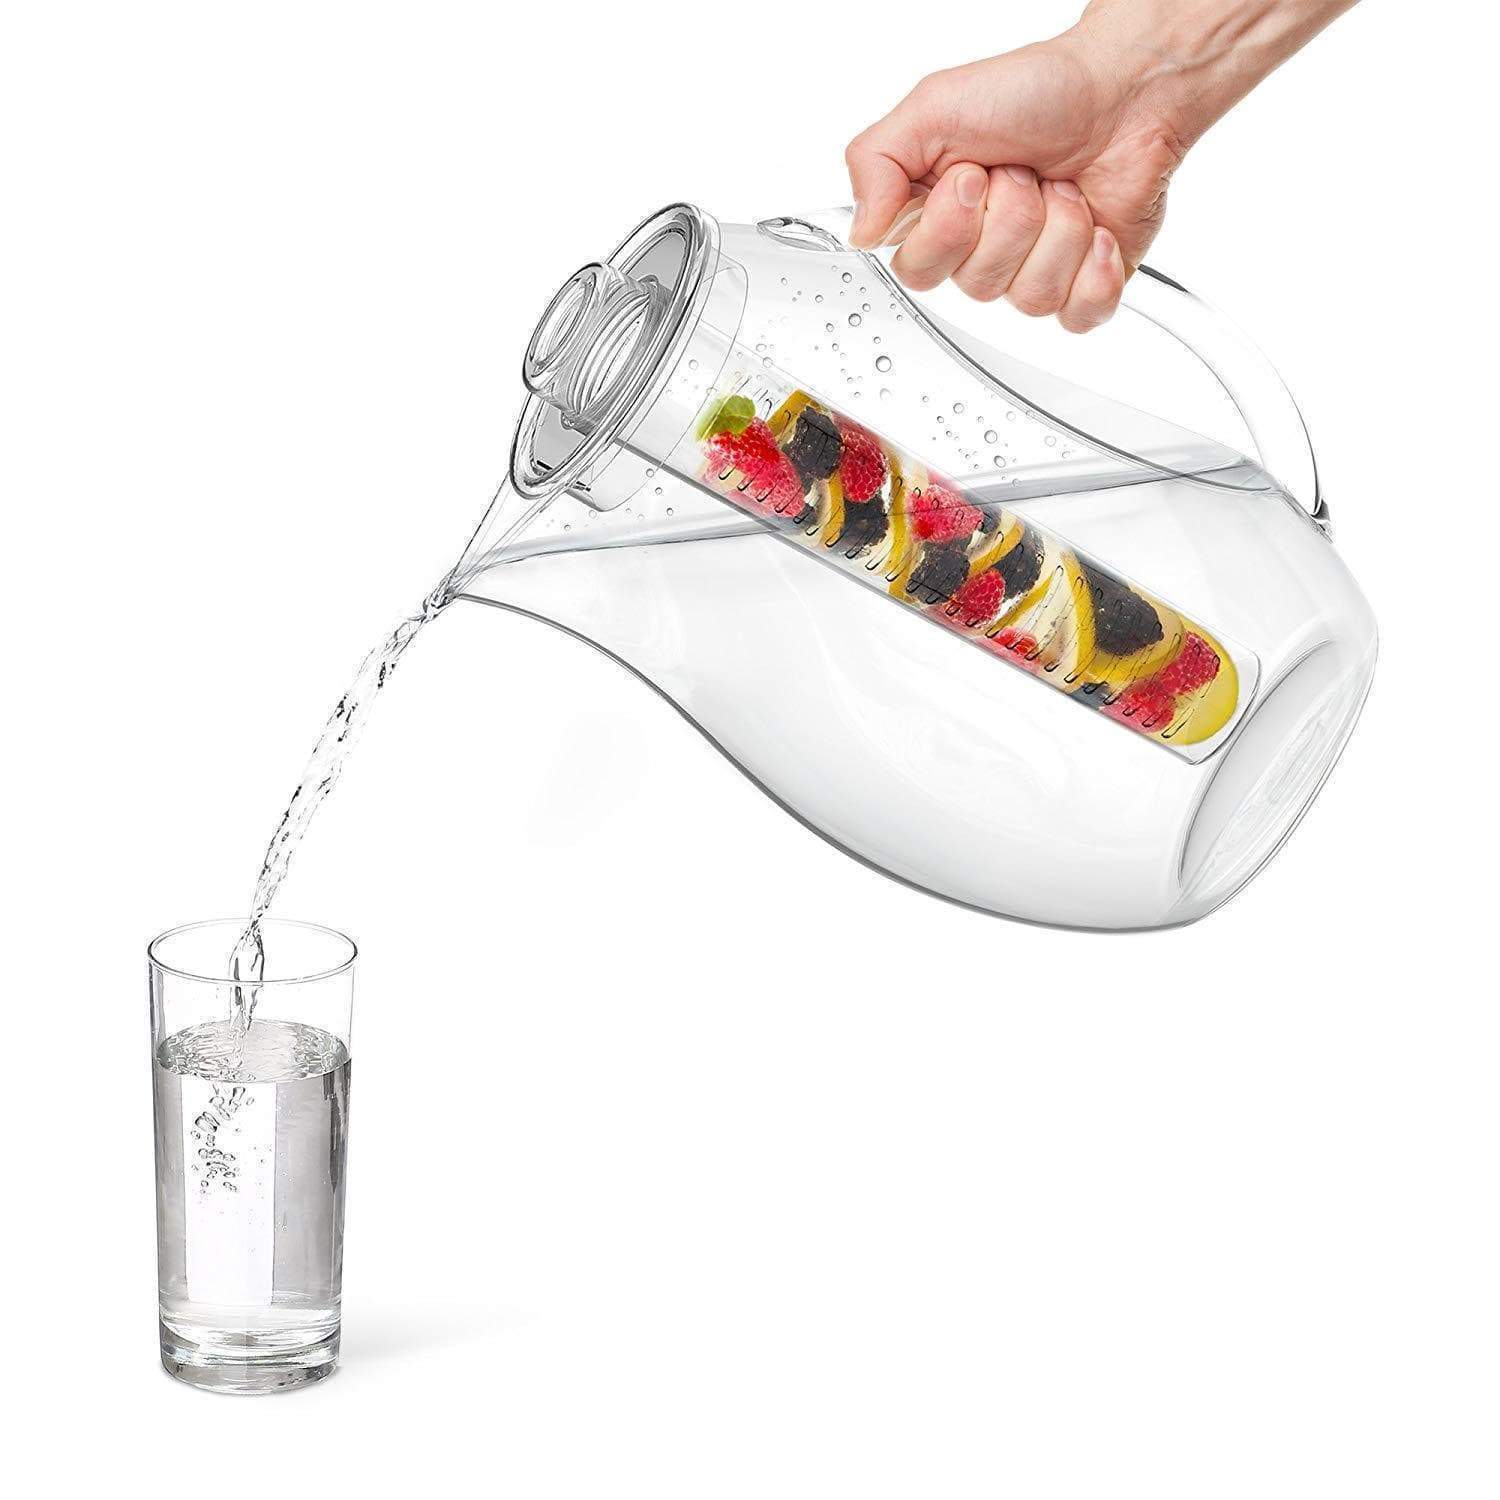 H2O Infusion Pitcher - Fruit-Infuse Your Water